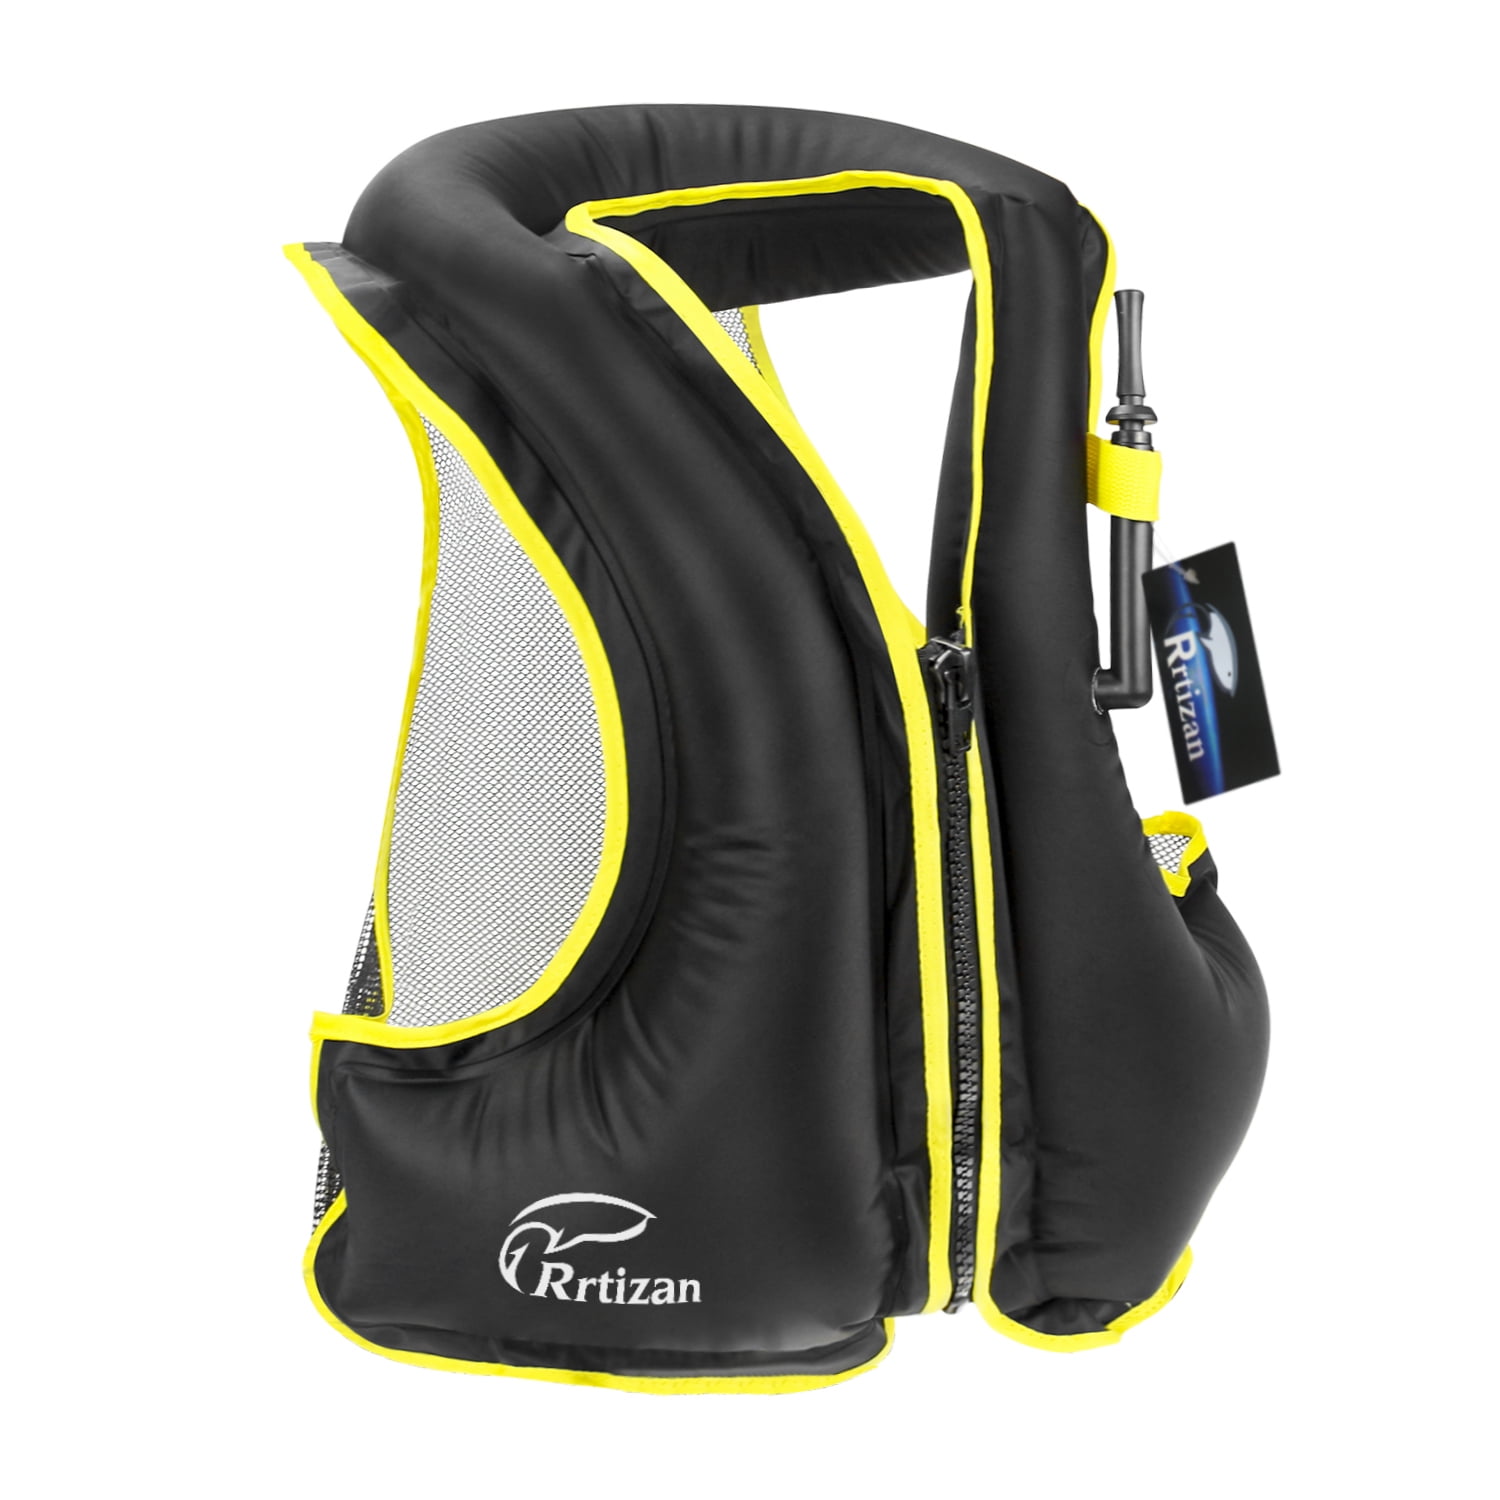 Rrtizan Adult Inflatable Swim Vest Life Jacket for Snorkeling,Suitable for 80-220lbs 